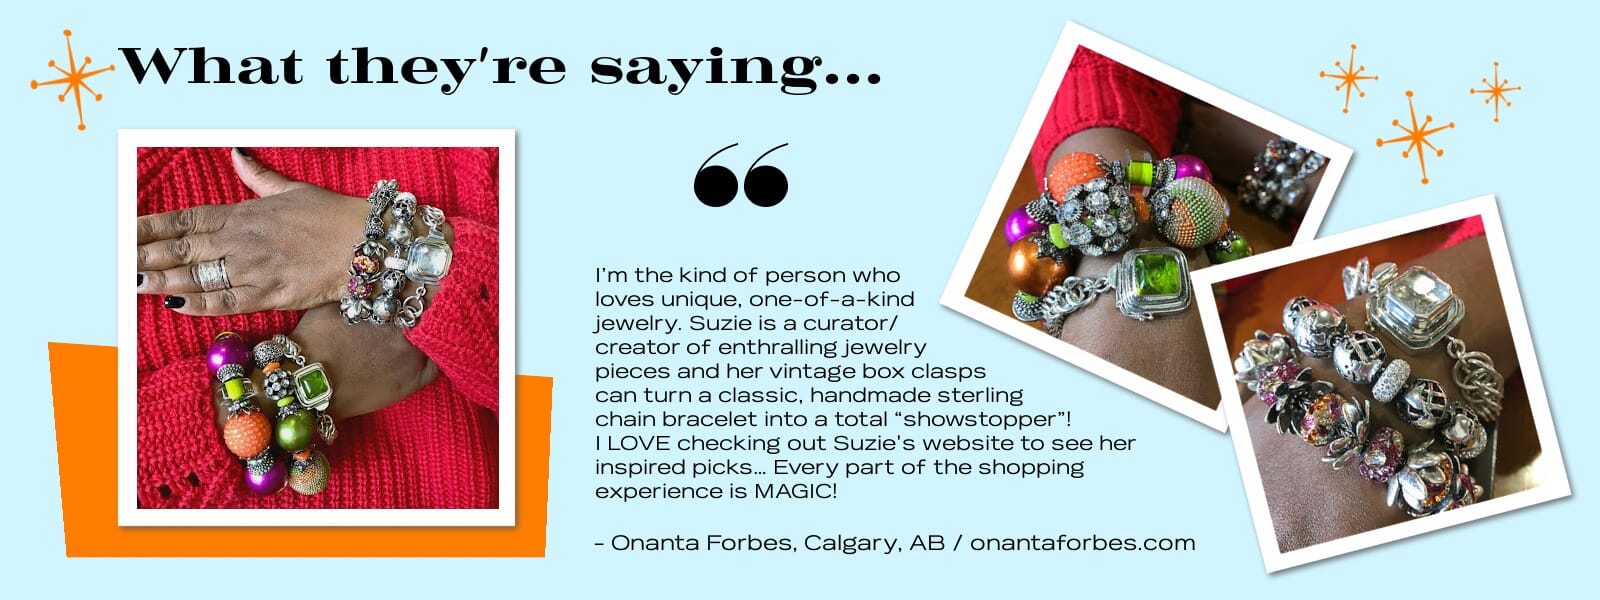 Customer Reviews -- See what Suzieqstudio.com customers are saying about Suzie Q Studio's one-of-a-kind ready-to-wear jewelry, jewelry-making supplies and DIY jewelry-making parties.